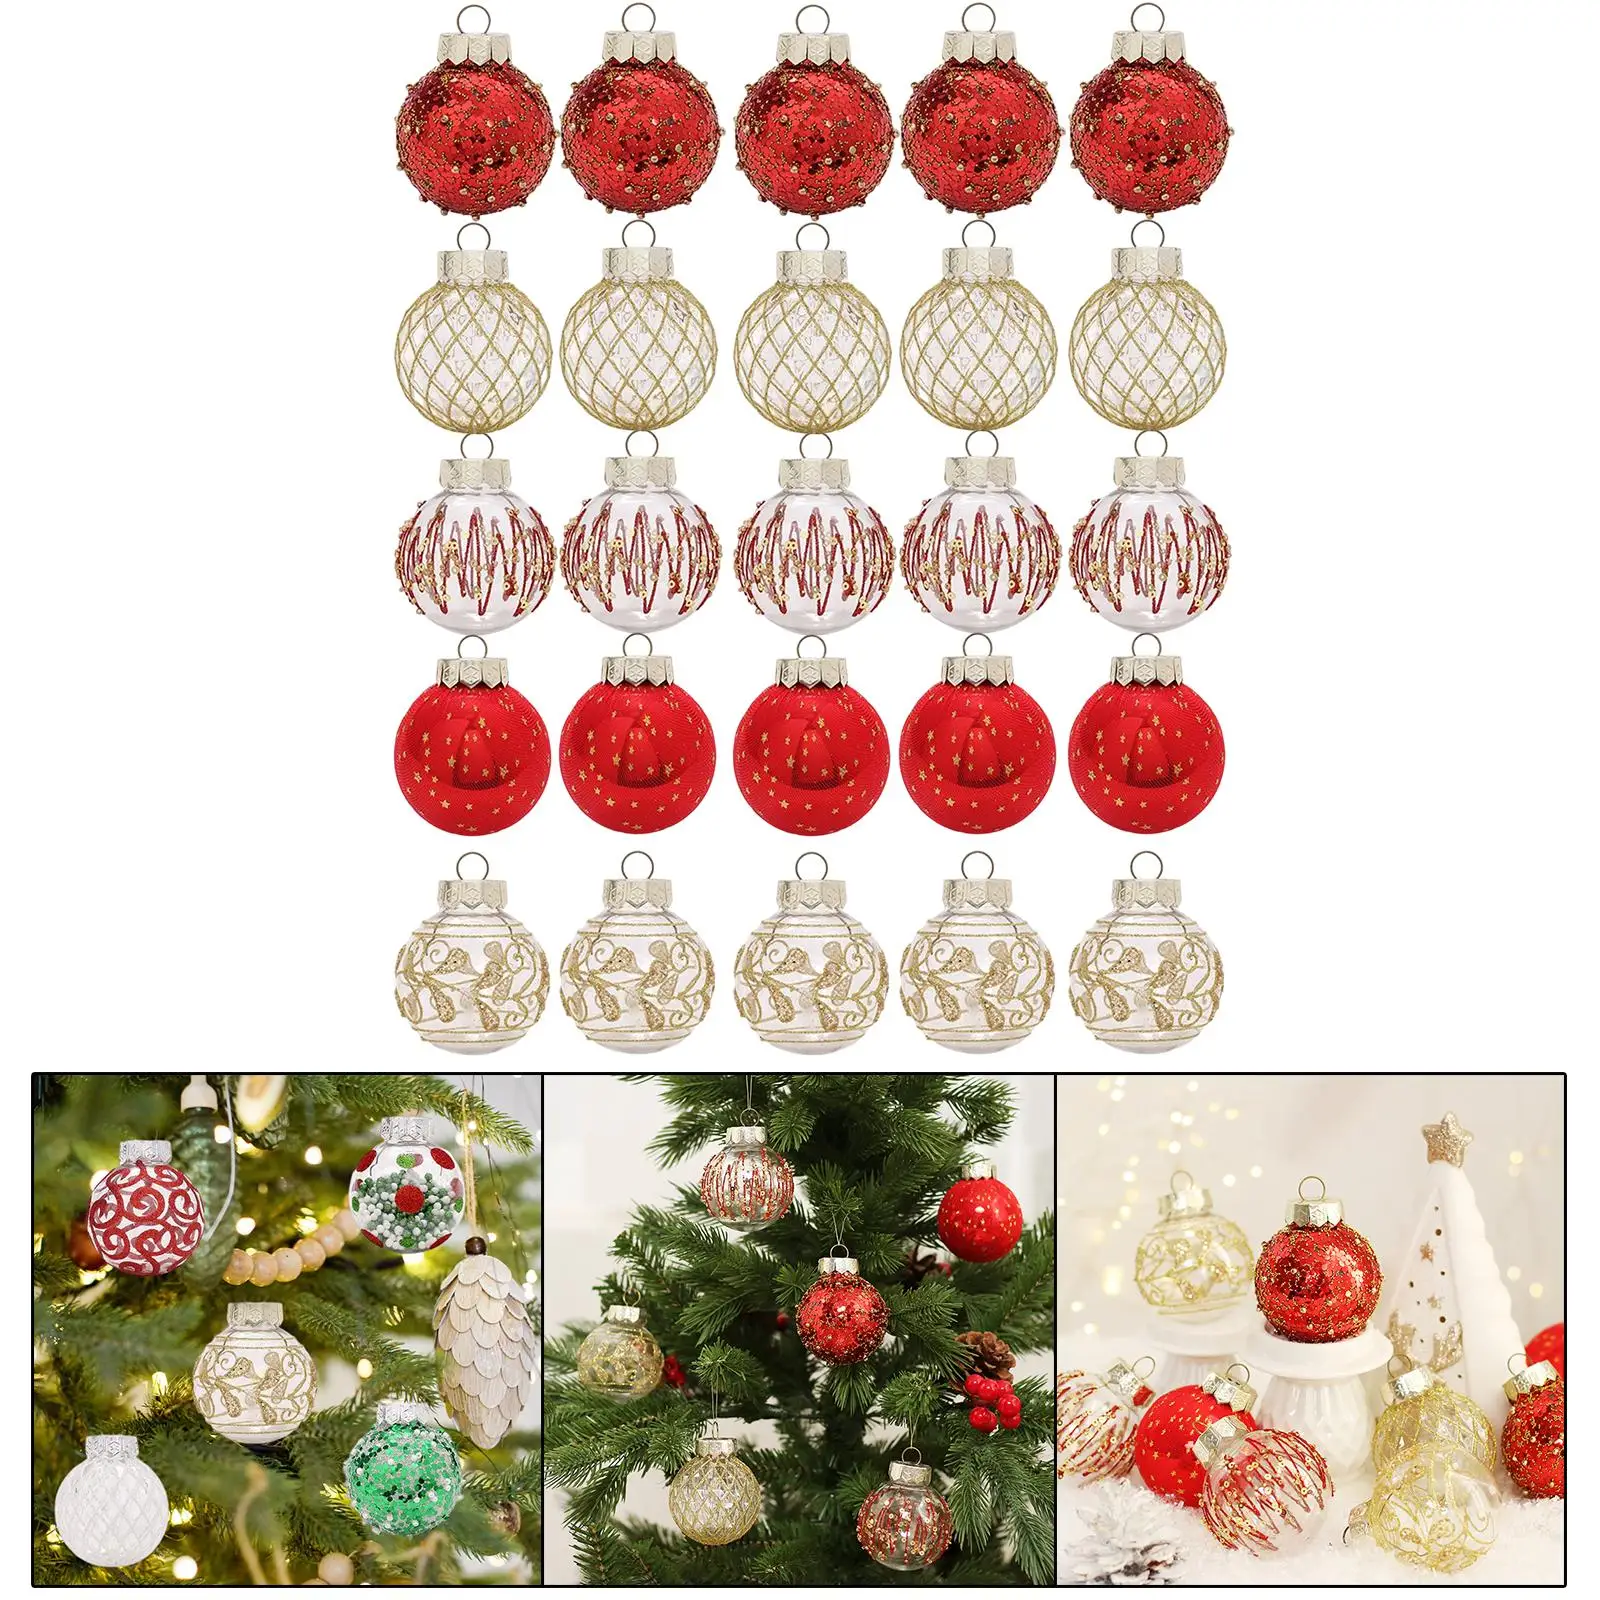 25 Pieces Christmas Ball Ornaments Christmas Tree Decorations for Ceiling